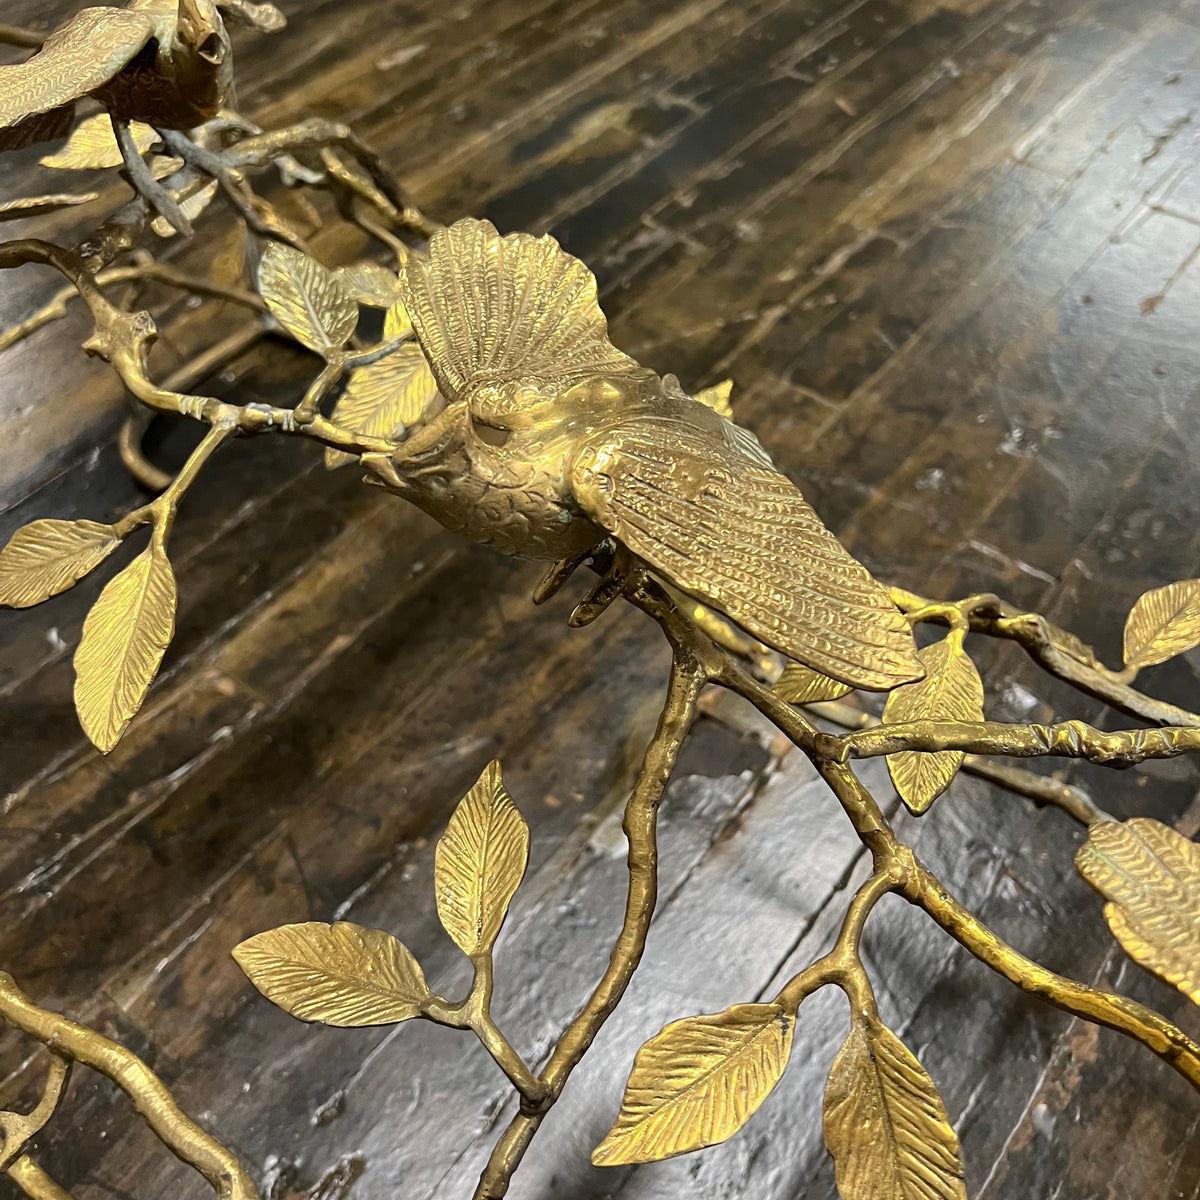 Beautiful coffee table base in the style of Giacometti.  It has a sculptural quality.  It features birds on branches. Chicago, IL, Studio Sonja Milan, midcentury coffee table, unique sculptural brass coffee table